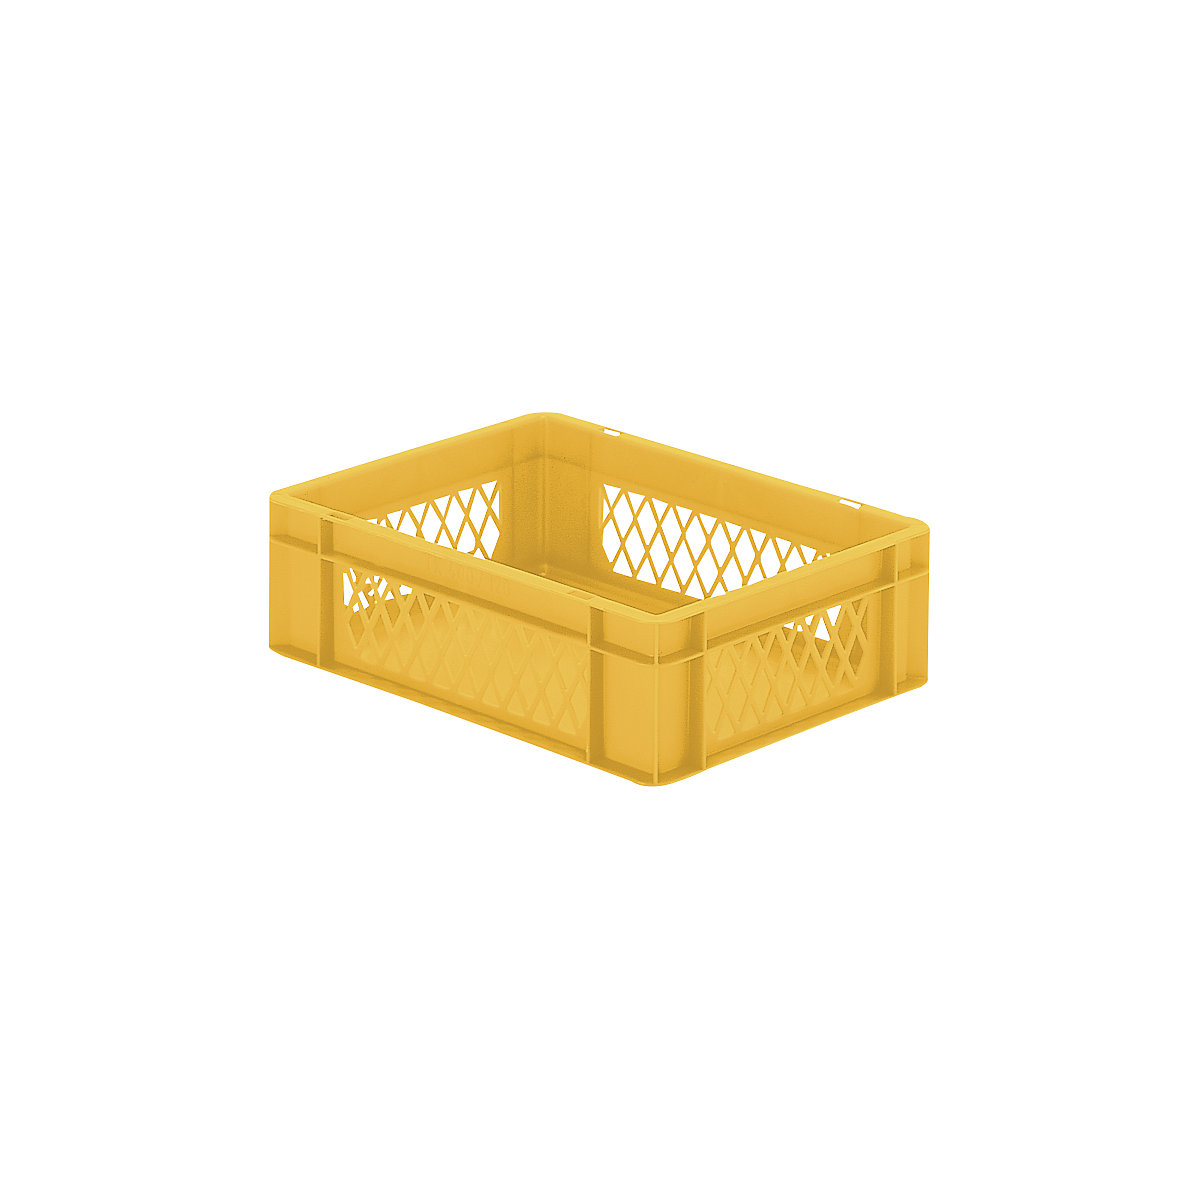 Euro stacking container, perforated walls, closed base, LxWxH 400 x 300 x 120 mm, yellow, pack of 5